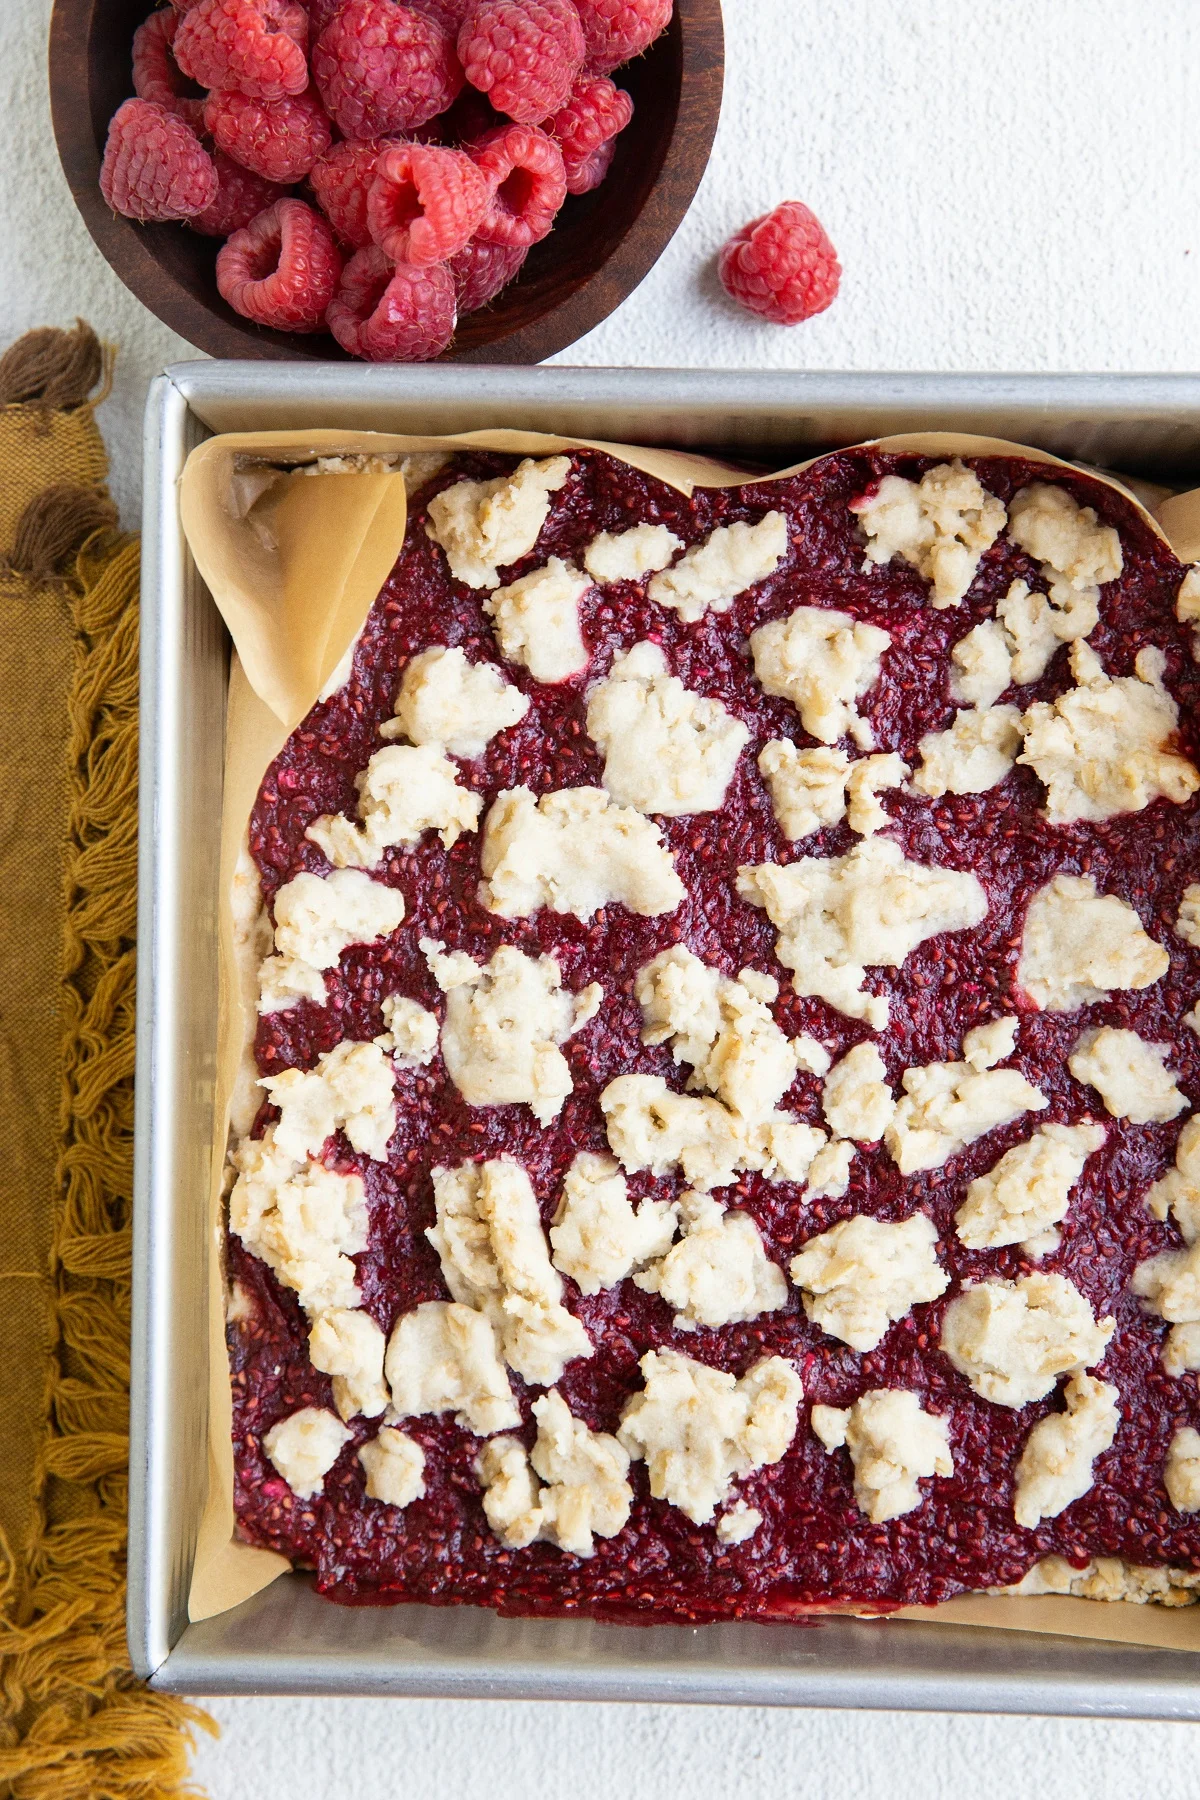 Square baking pan with raspberry crumb bars inside. A bowl of fresh raspberries and a gold napkin to the side of the baking dish.